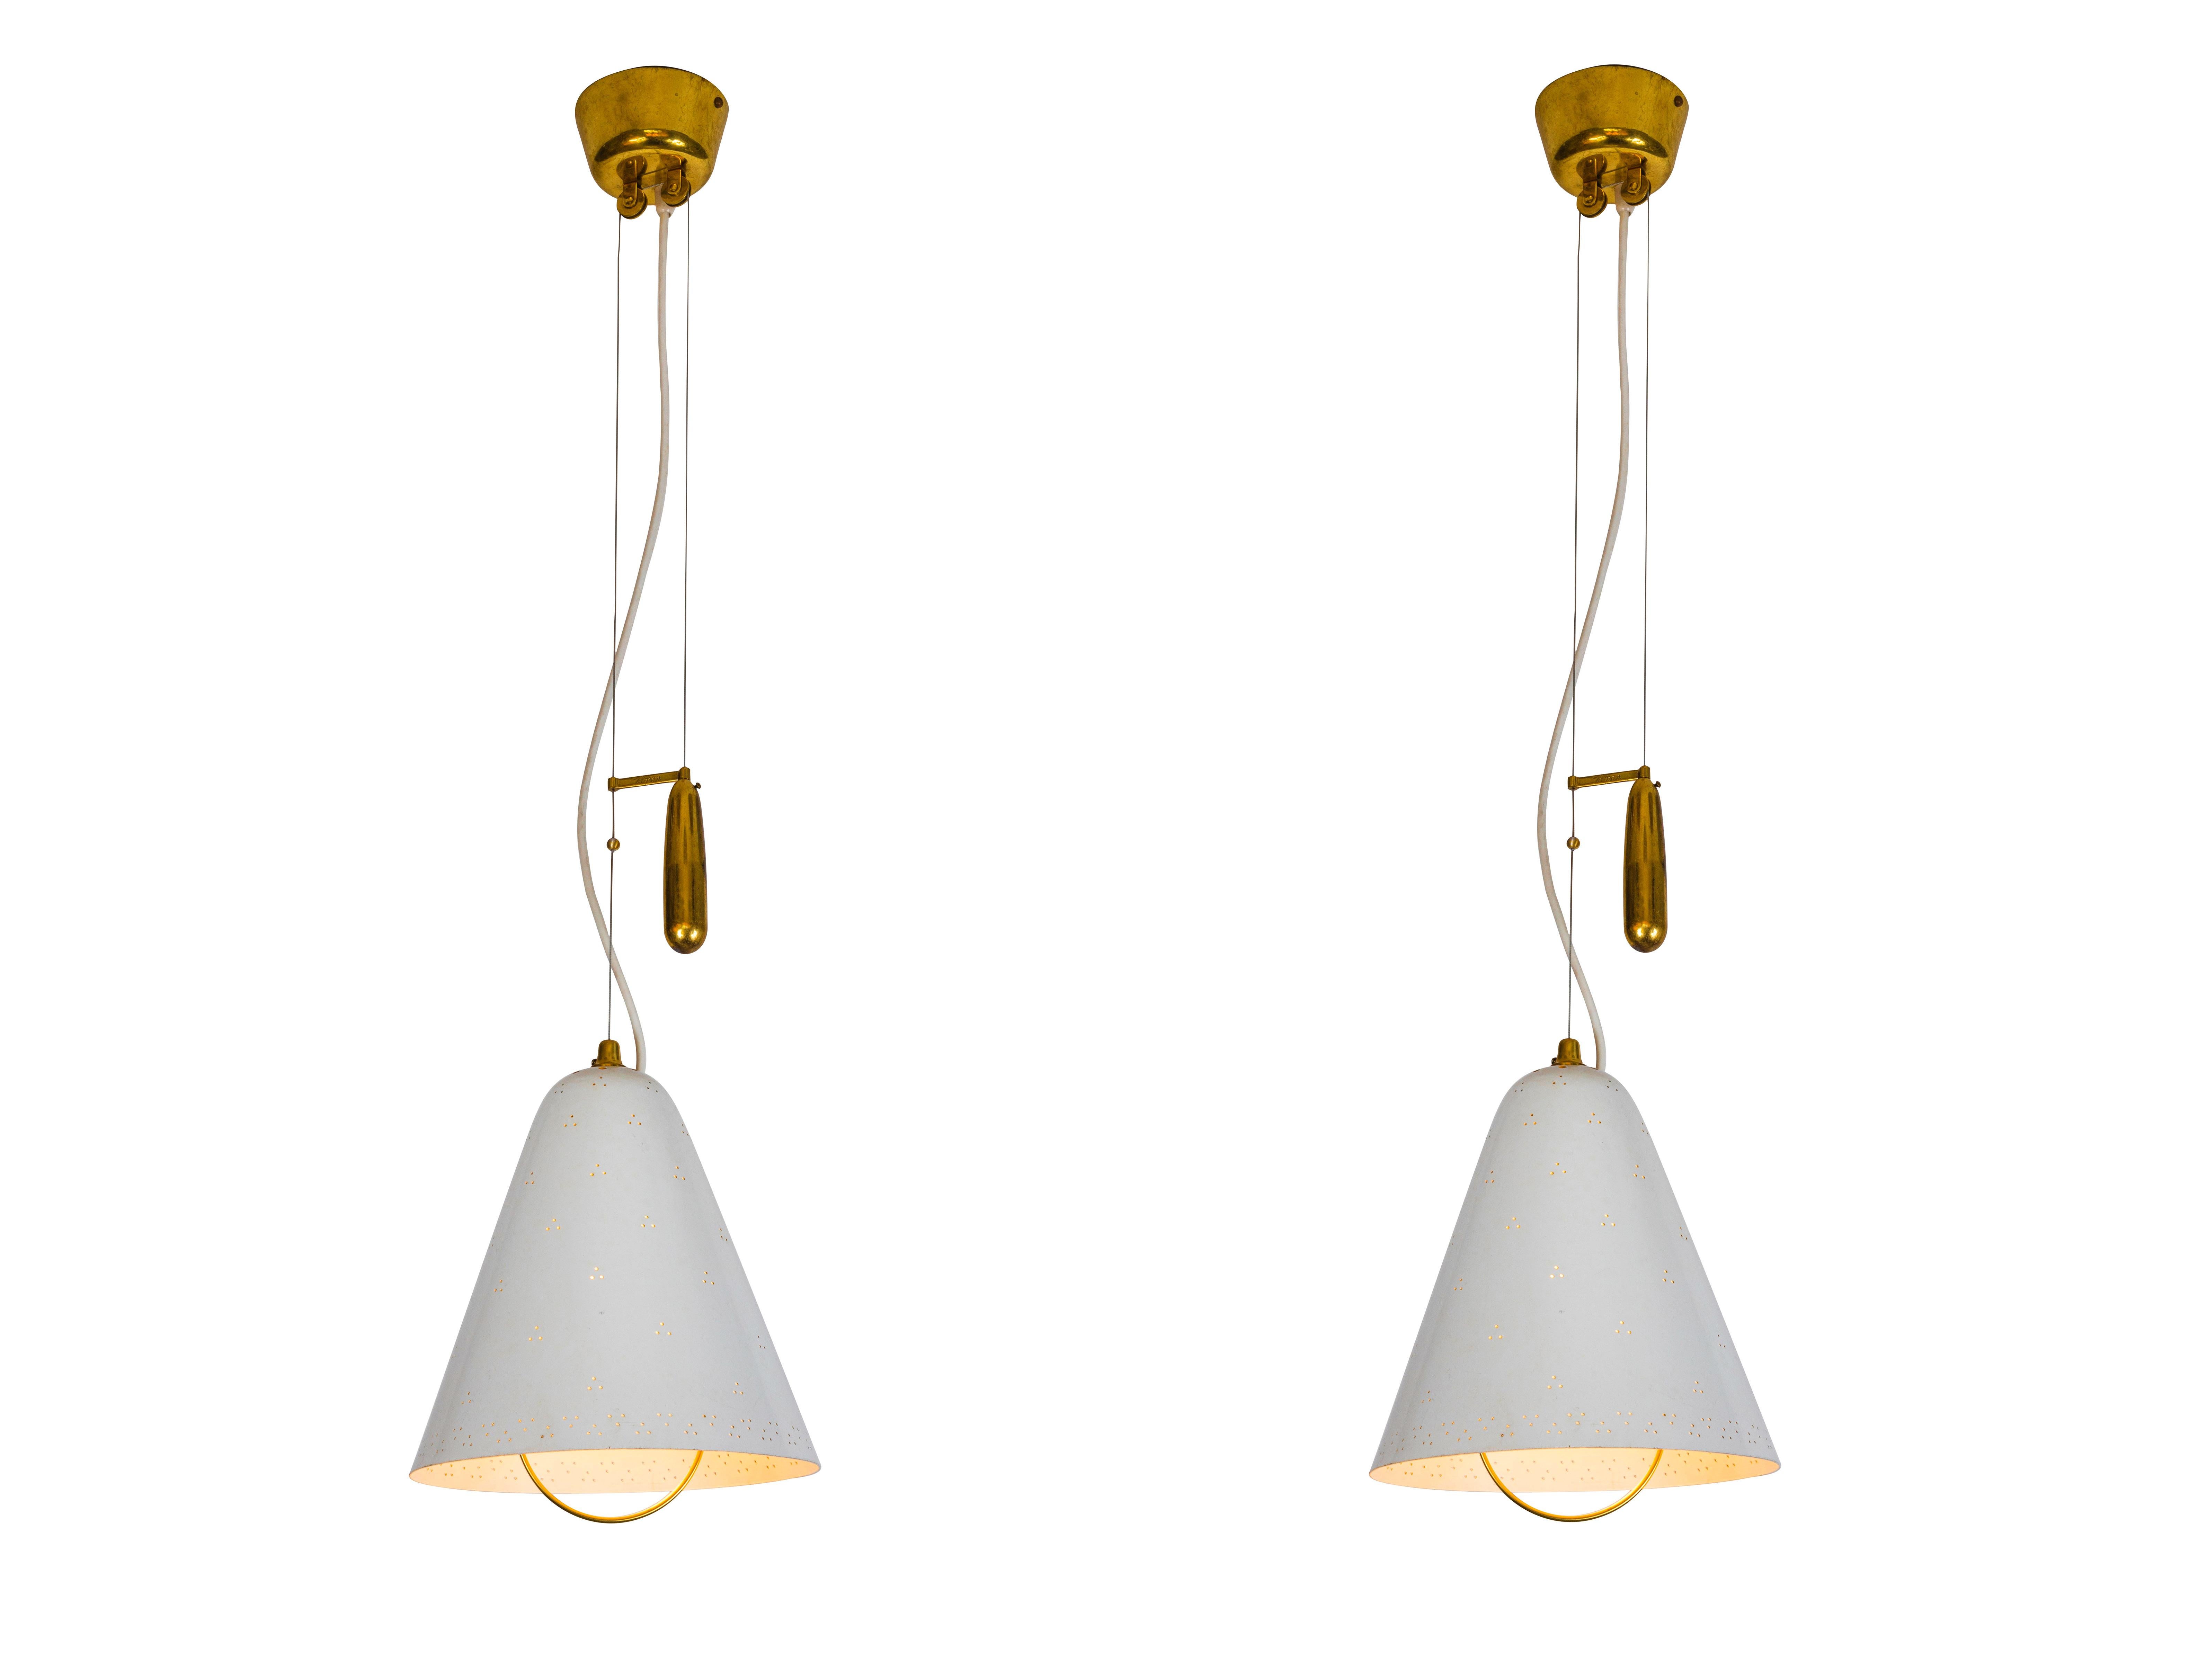 Pair of 1940s Paavo Tynell 'A1942' white counterweight pendants for Idman Oy. This rare and exceptionally pair is executed in white painted perforated metal and brass, and can be raised and lowered using its ingenious counterweight and pulley